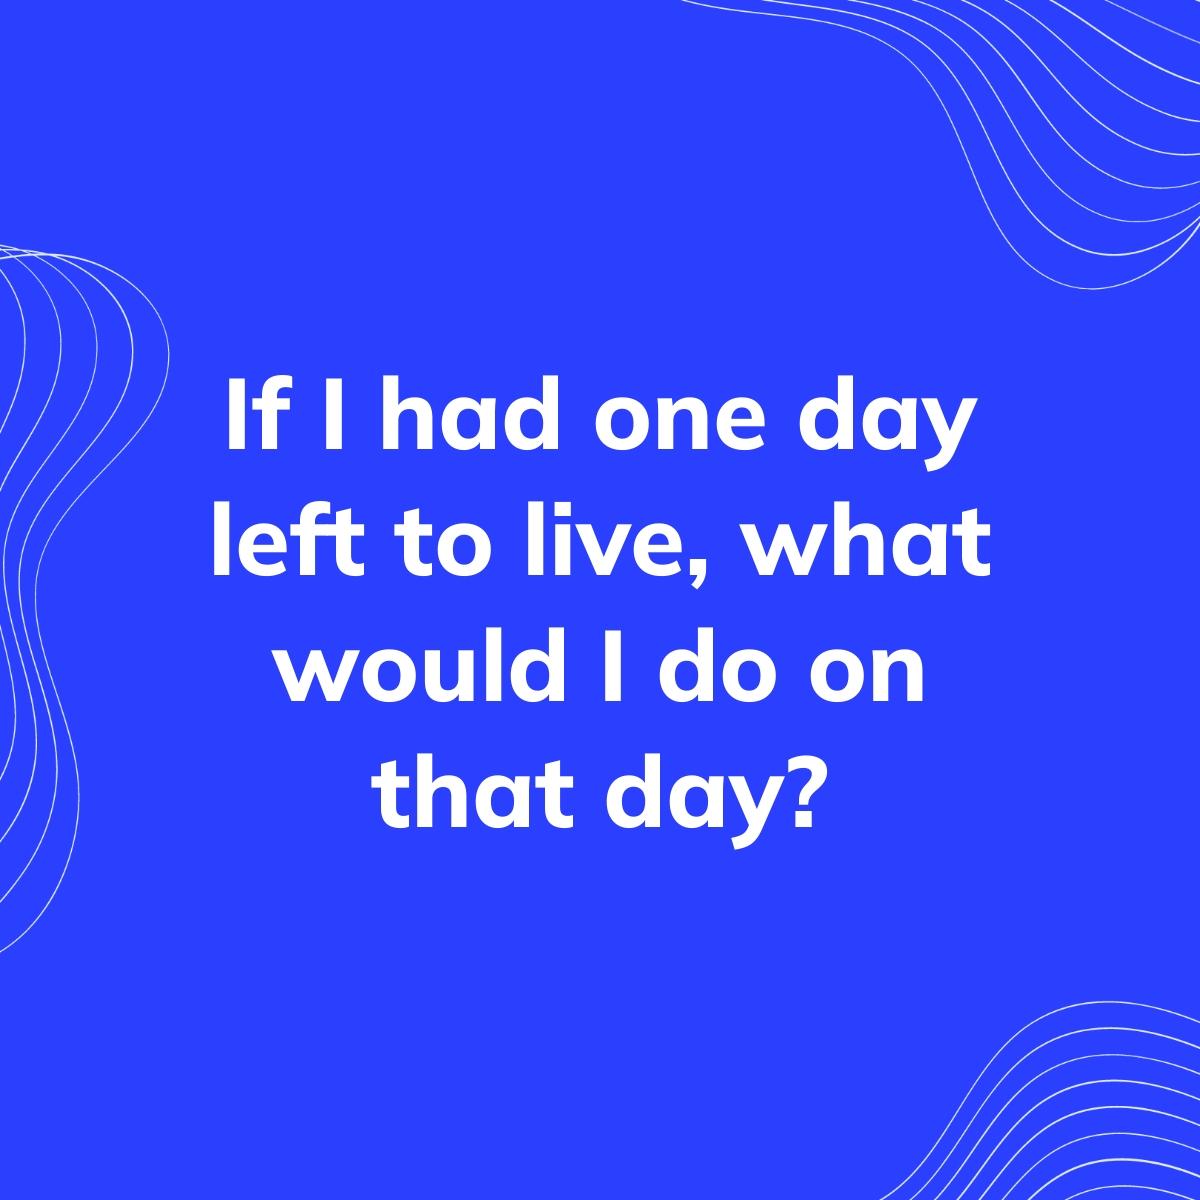 Journal Prompt: If I had one day left to live, what would I do on that day?